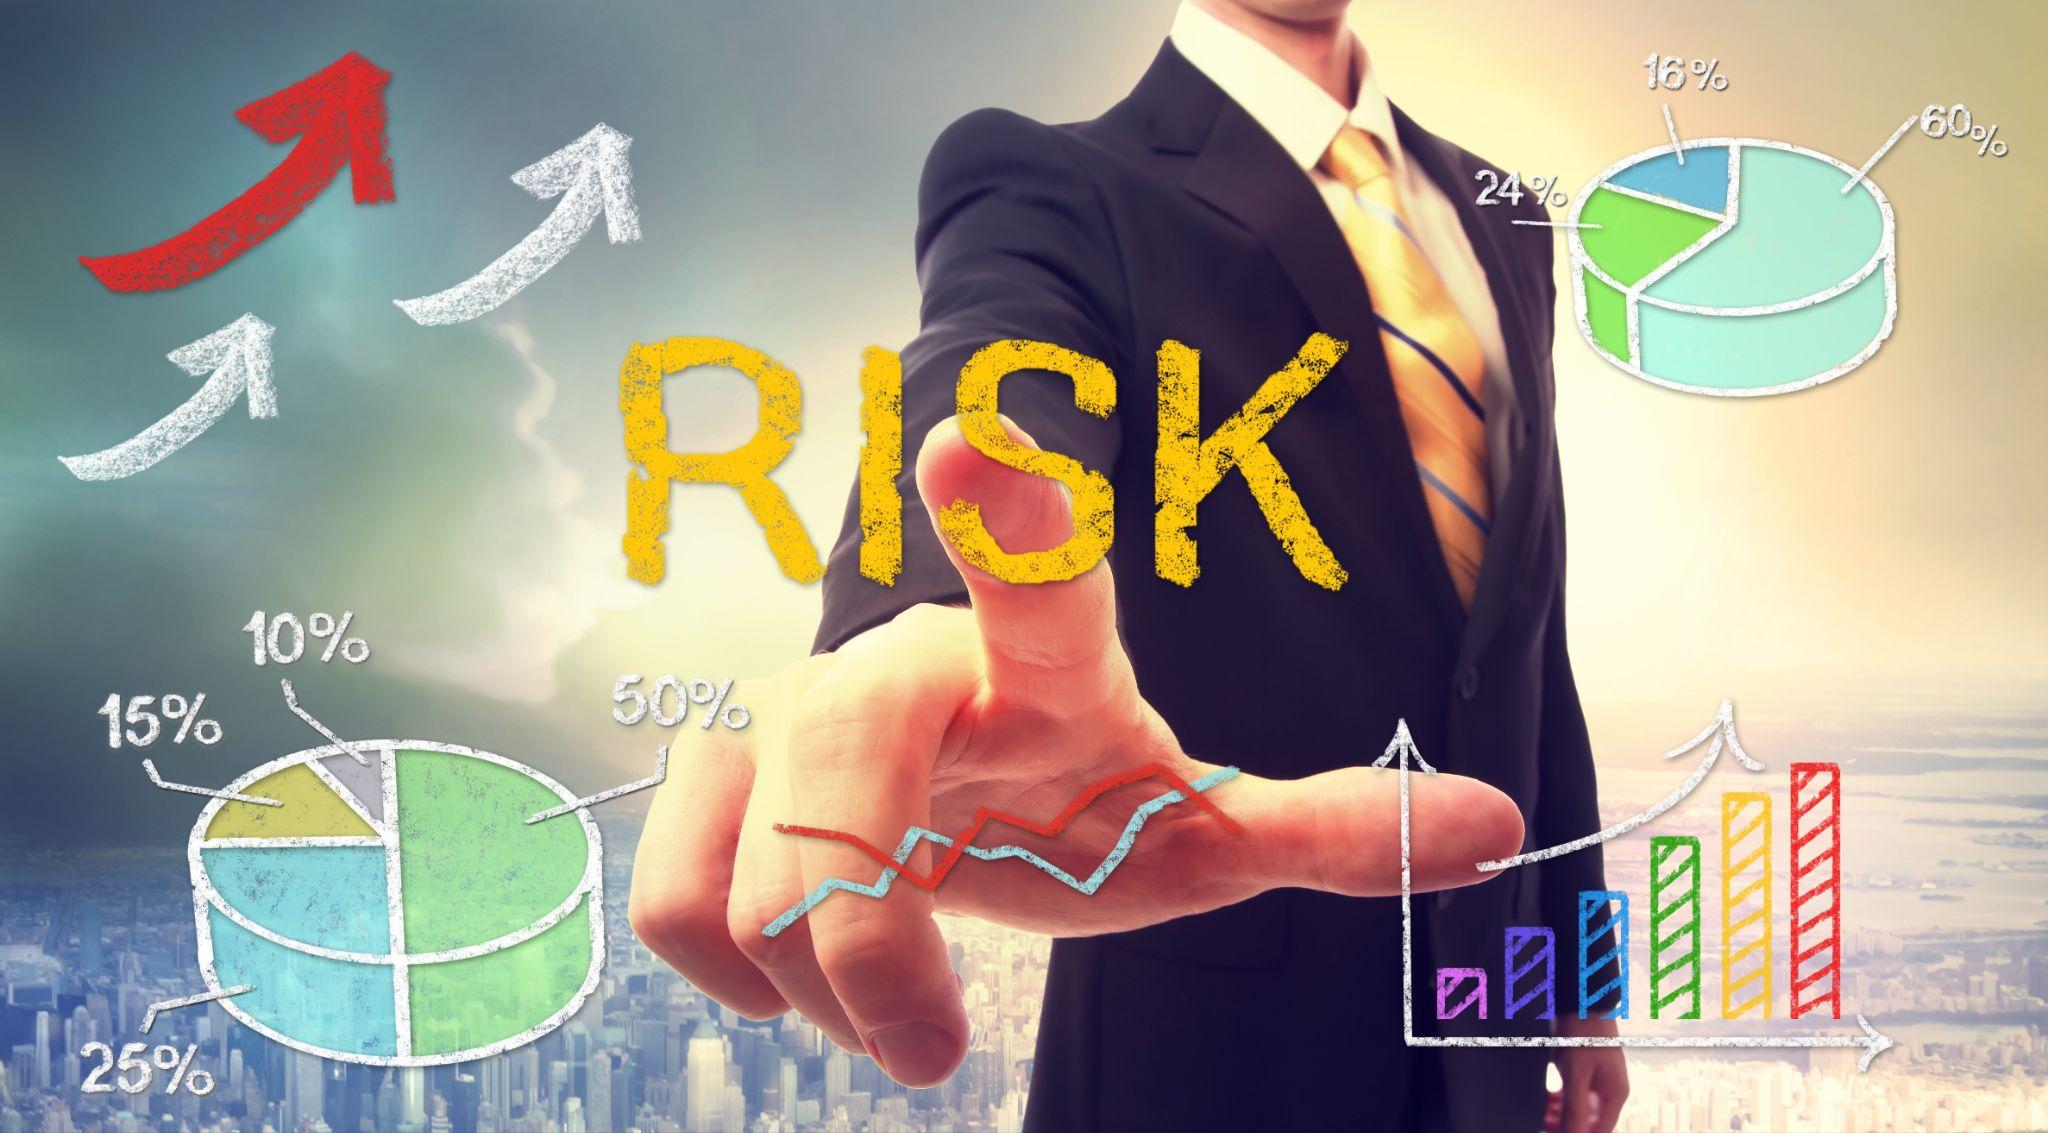 Enterprise risk management (ERM): What it is and how it works